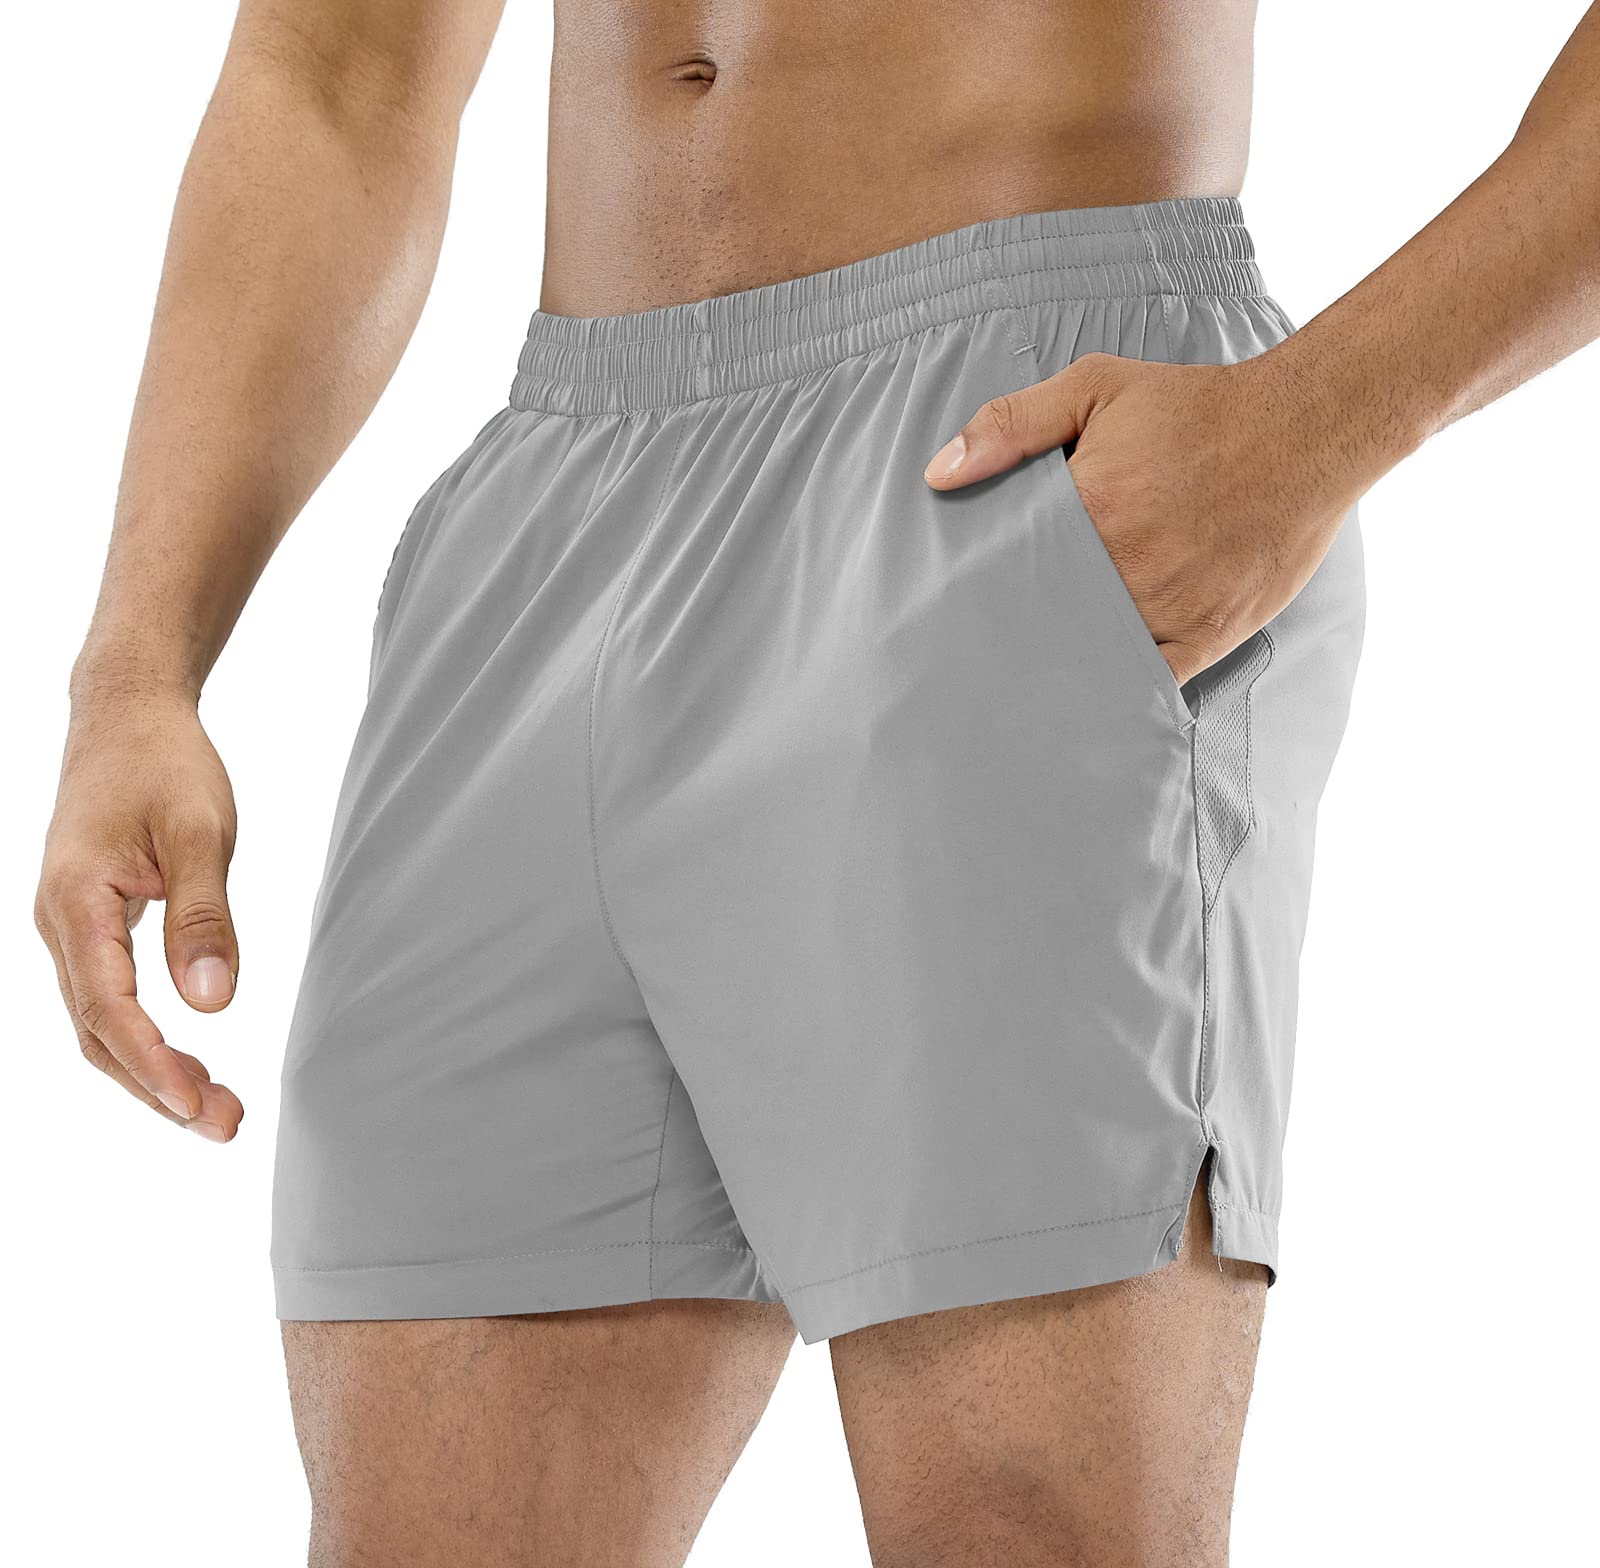 MIER Men's Workout Running Shorts Lightweight Active 5 Inches